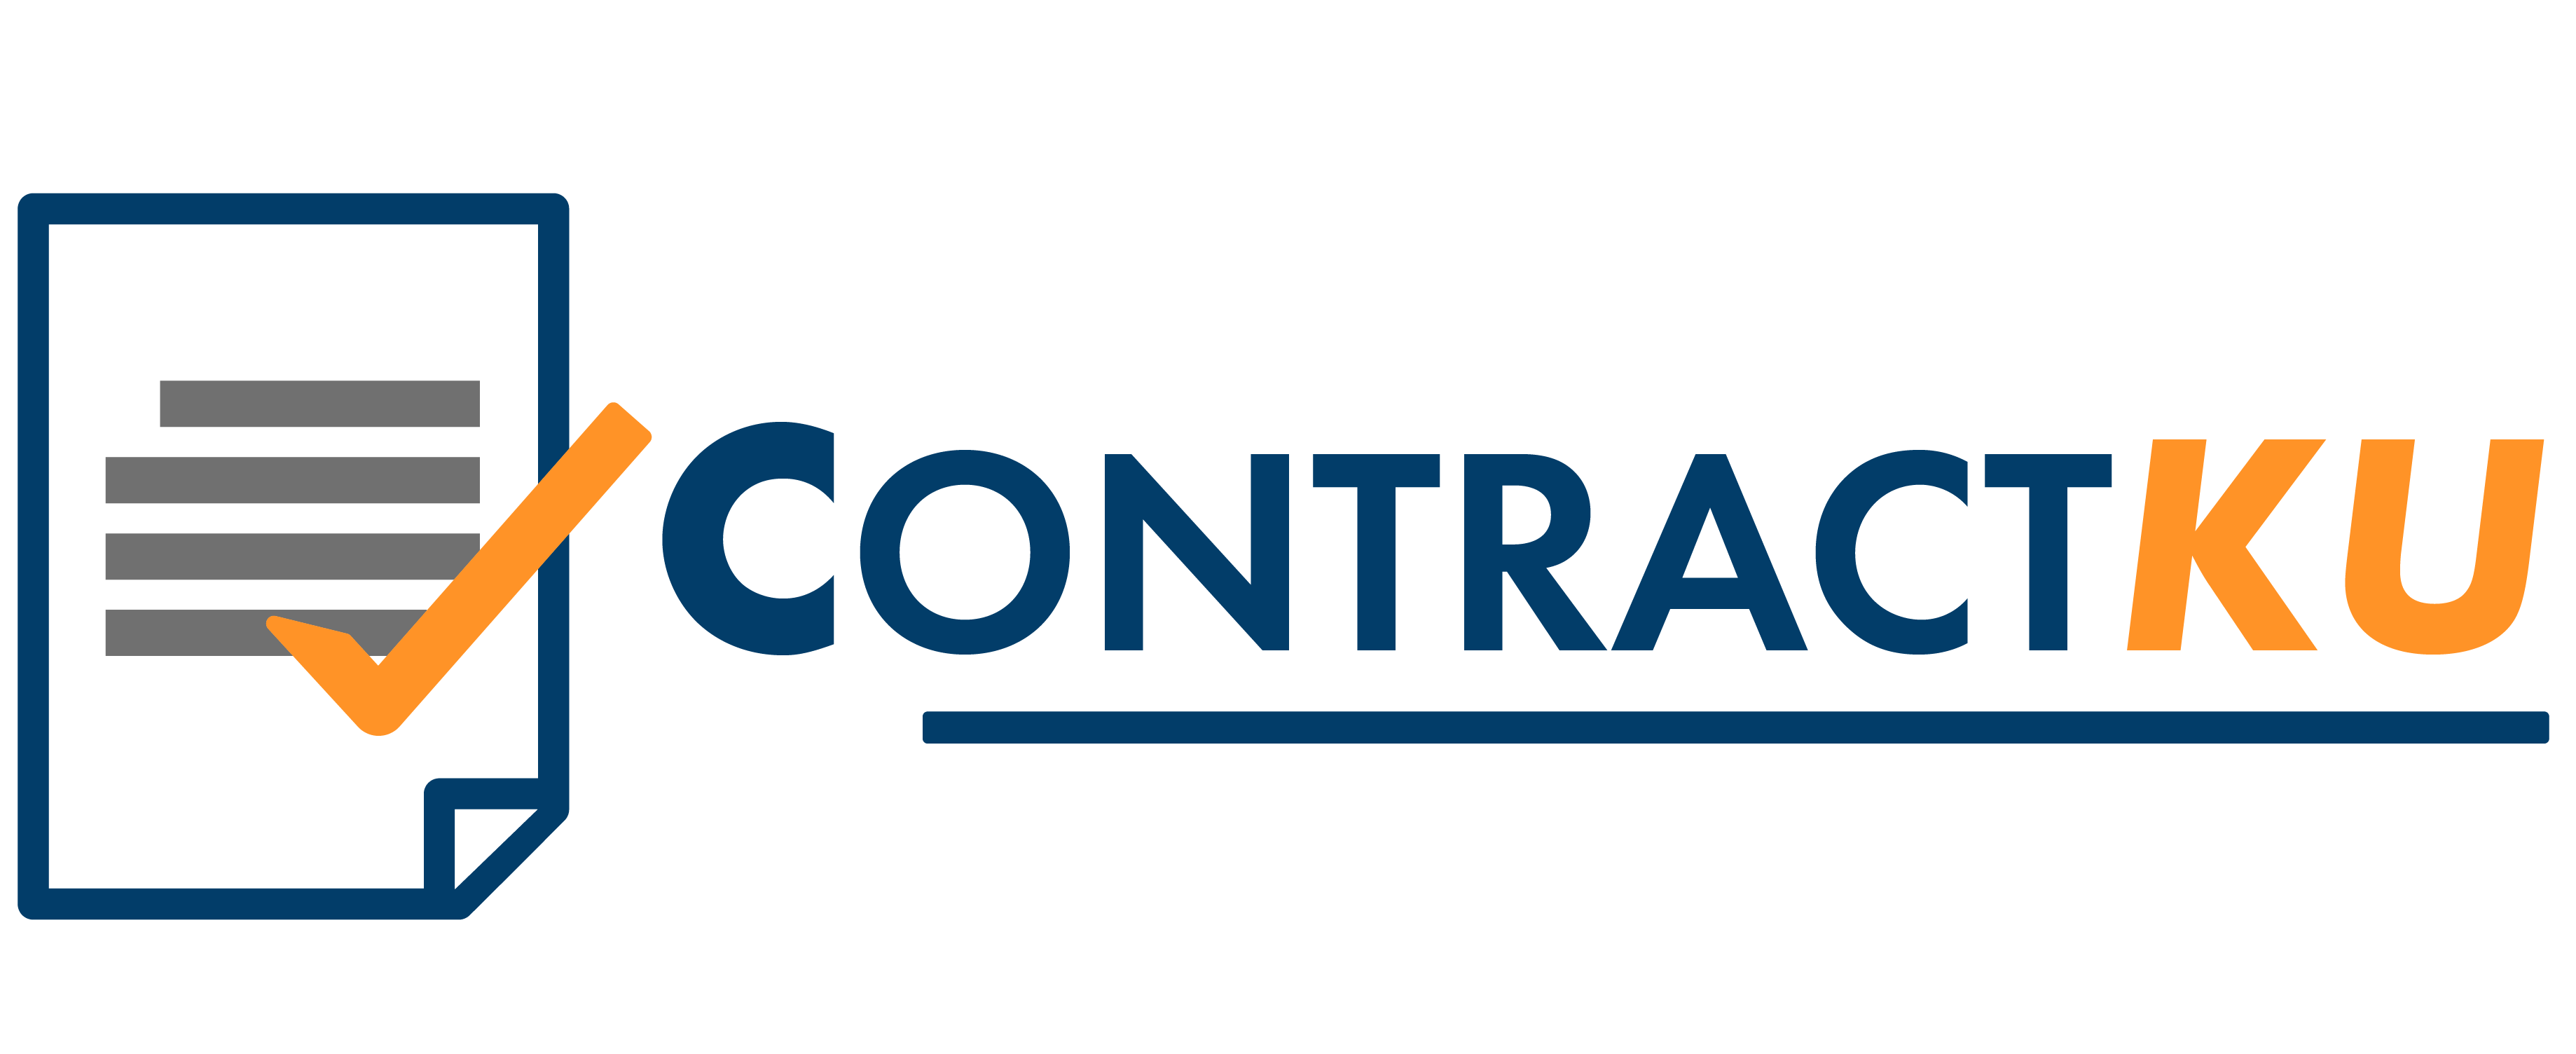 Contract Management System